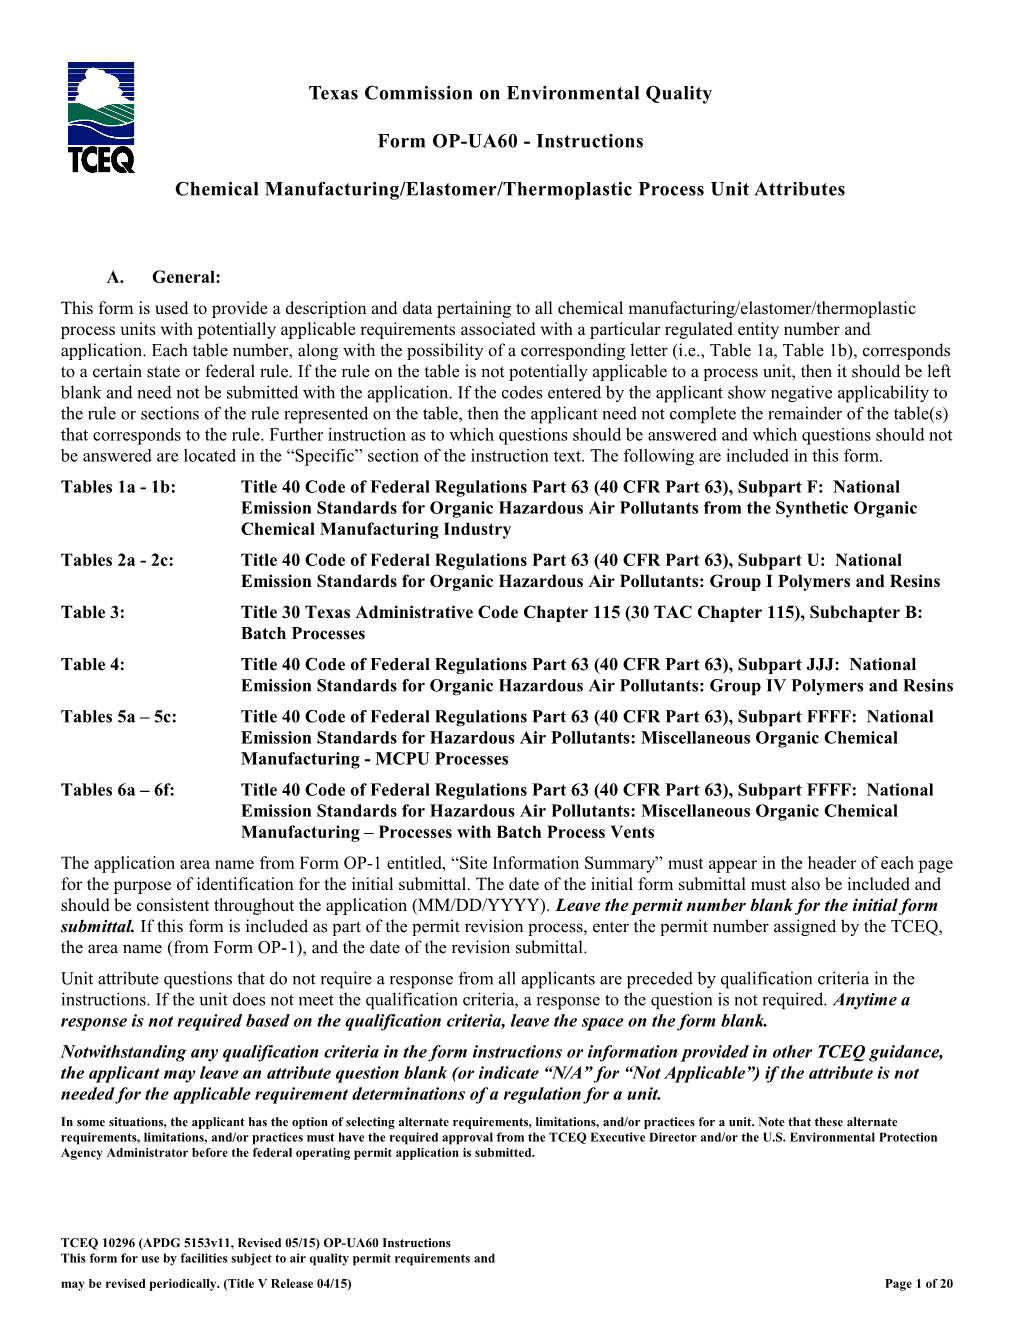 TCEQ-Form OP-UA60-Chemical Manufacturing/Eleastomer/Thermoplastic Process Unit Attributes